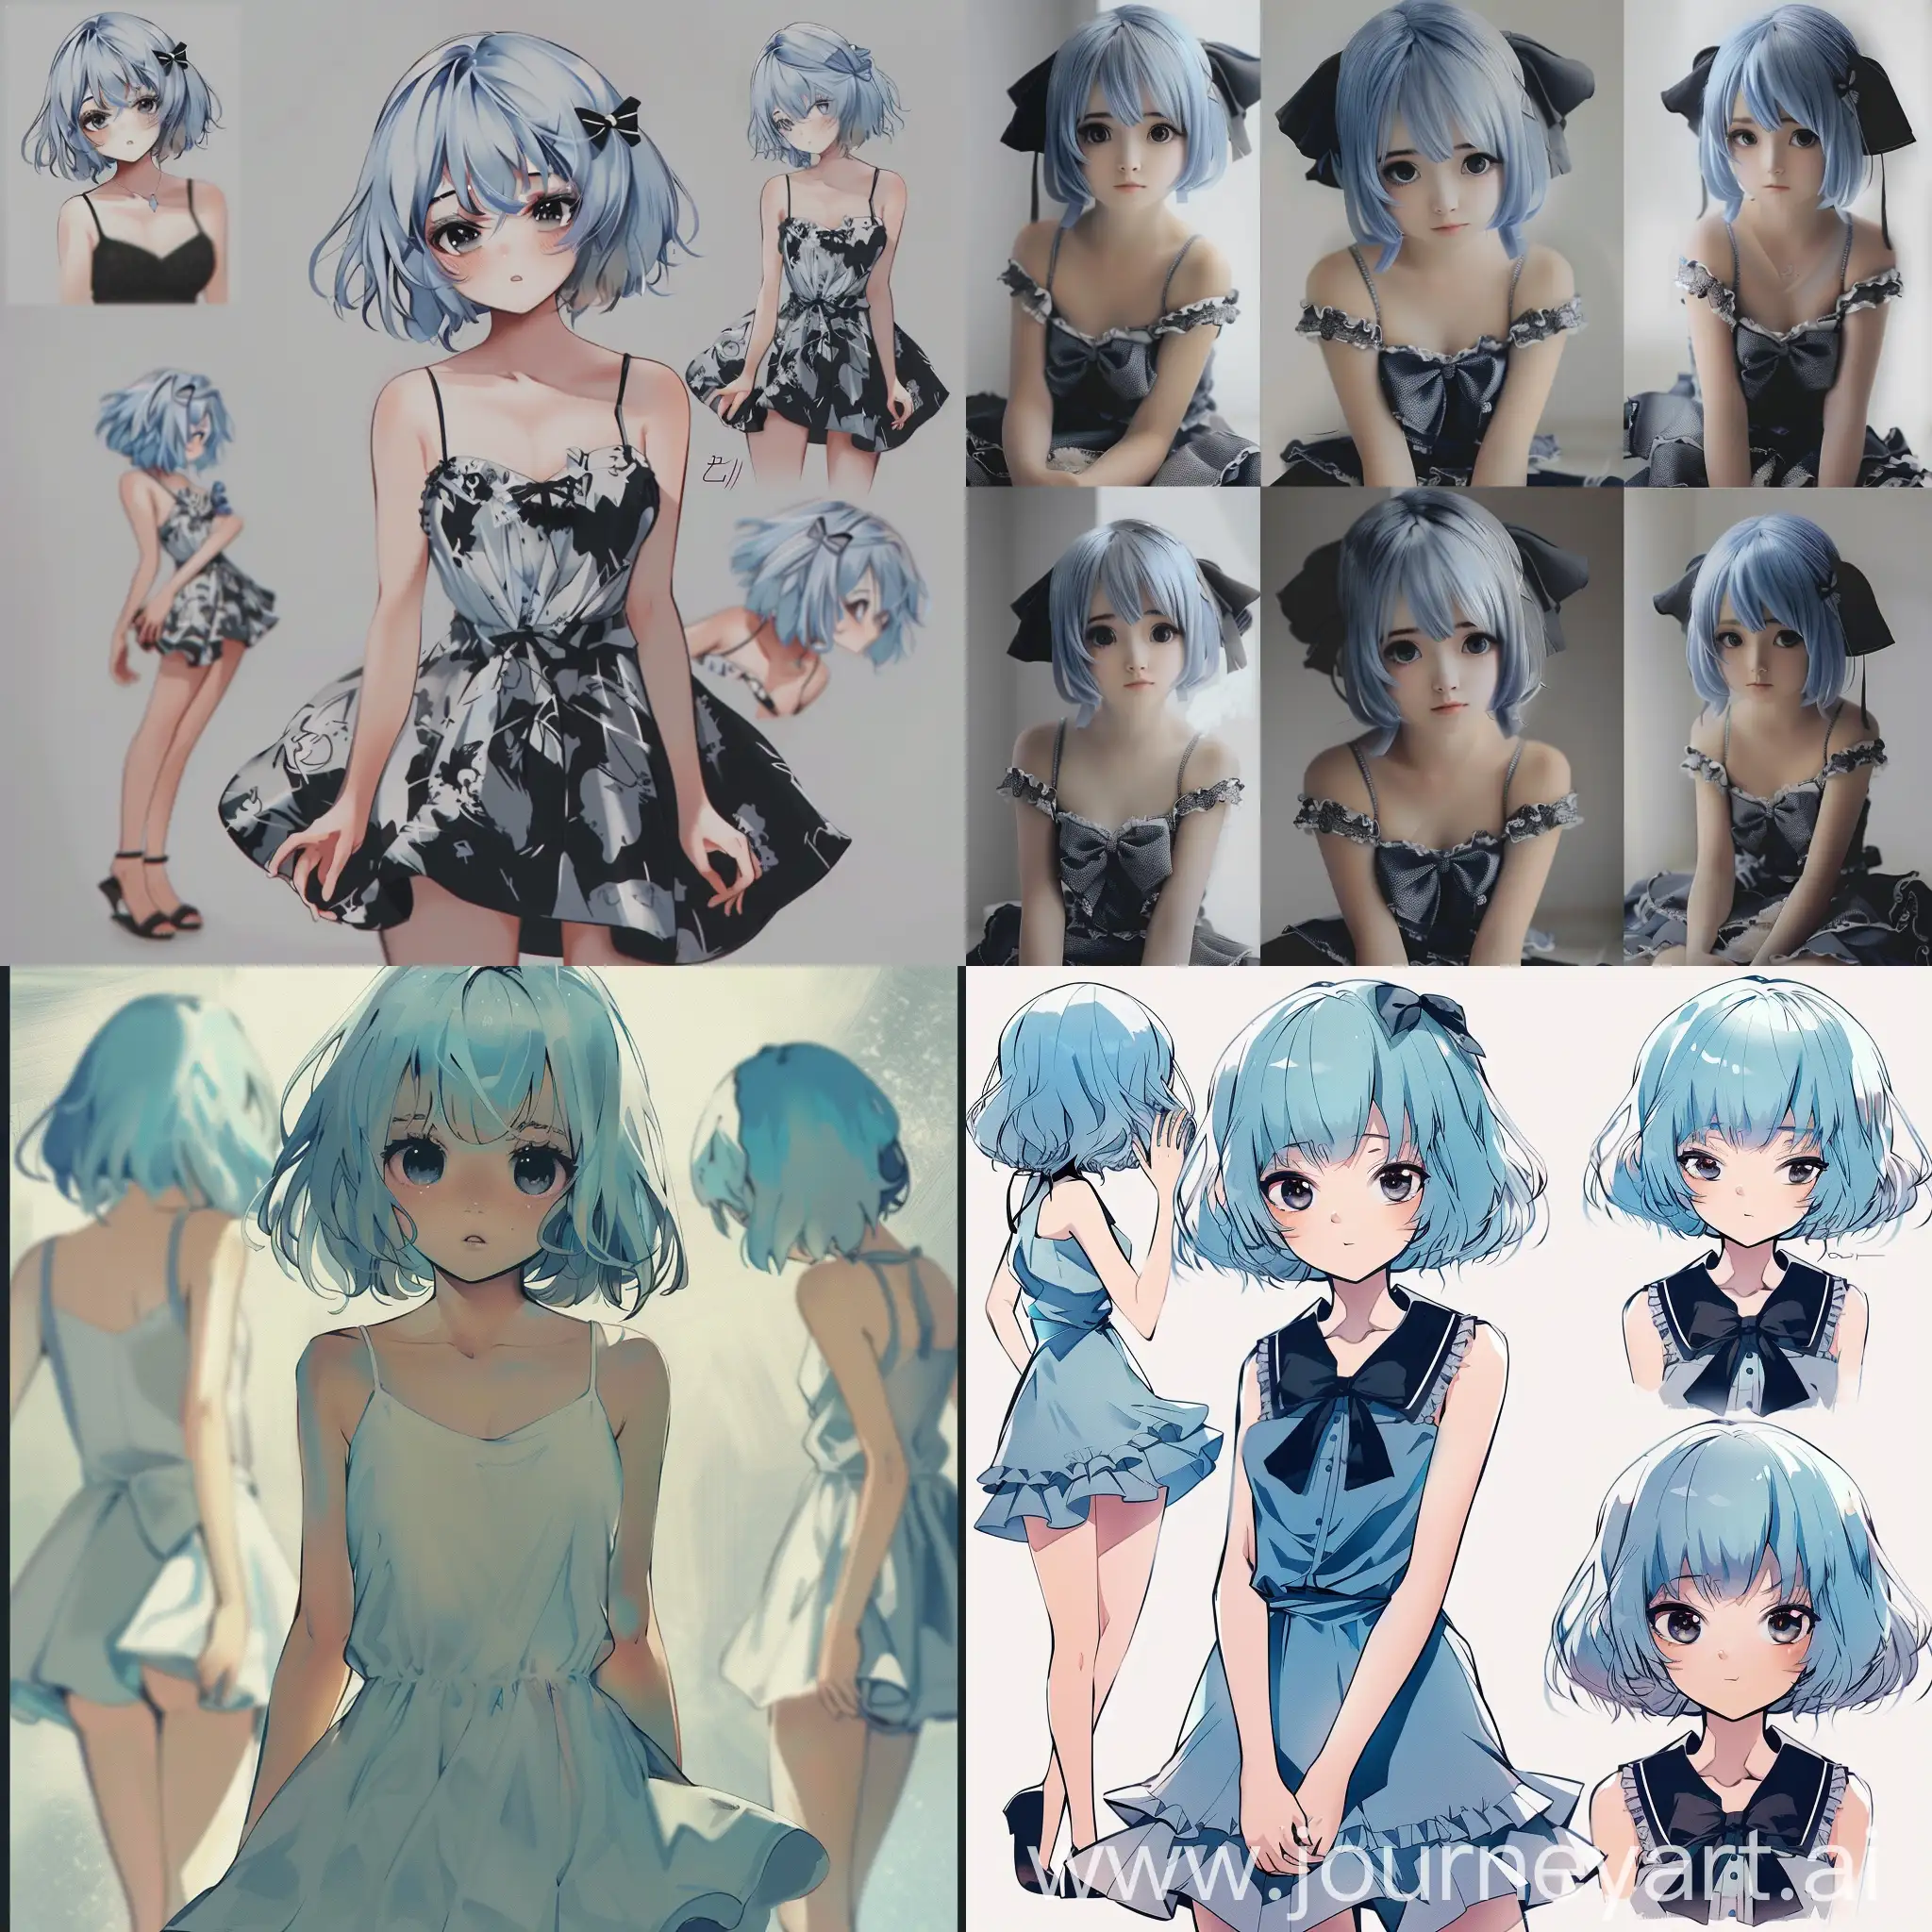 Adorable-Anime-Girl-with-Blue-Hair-and-Cute-Dress-in-Various-Poses